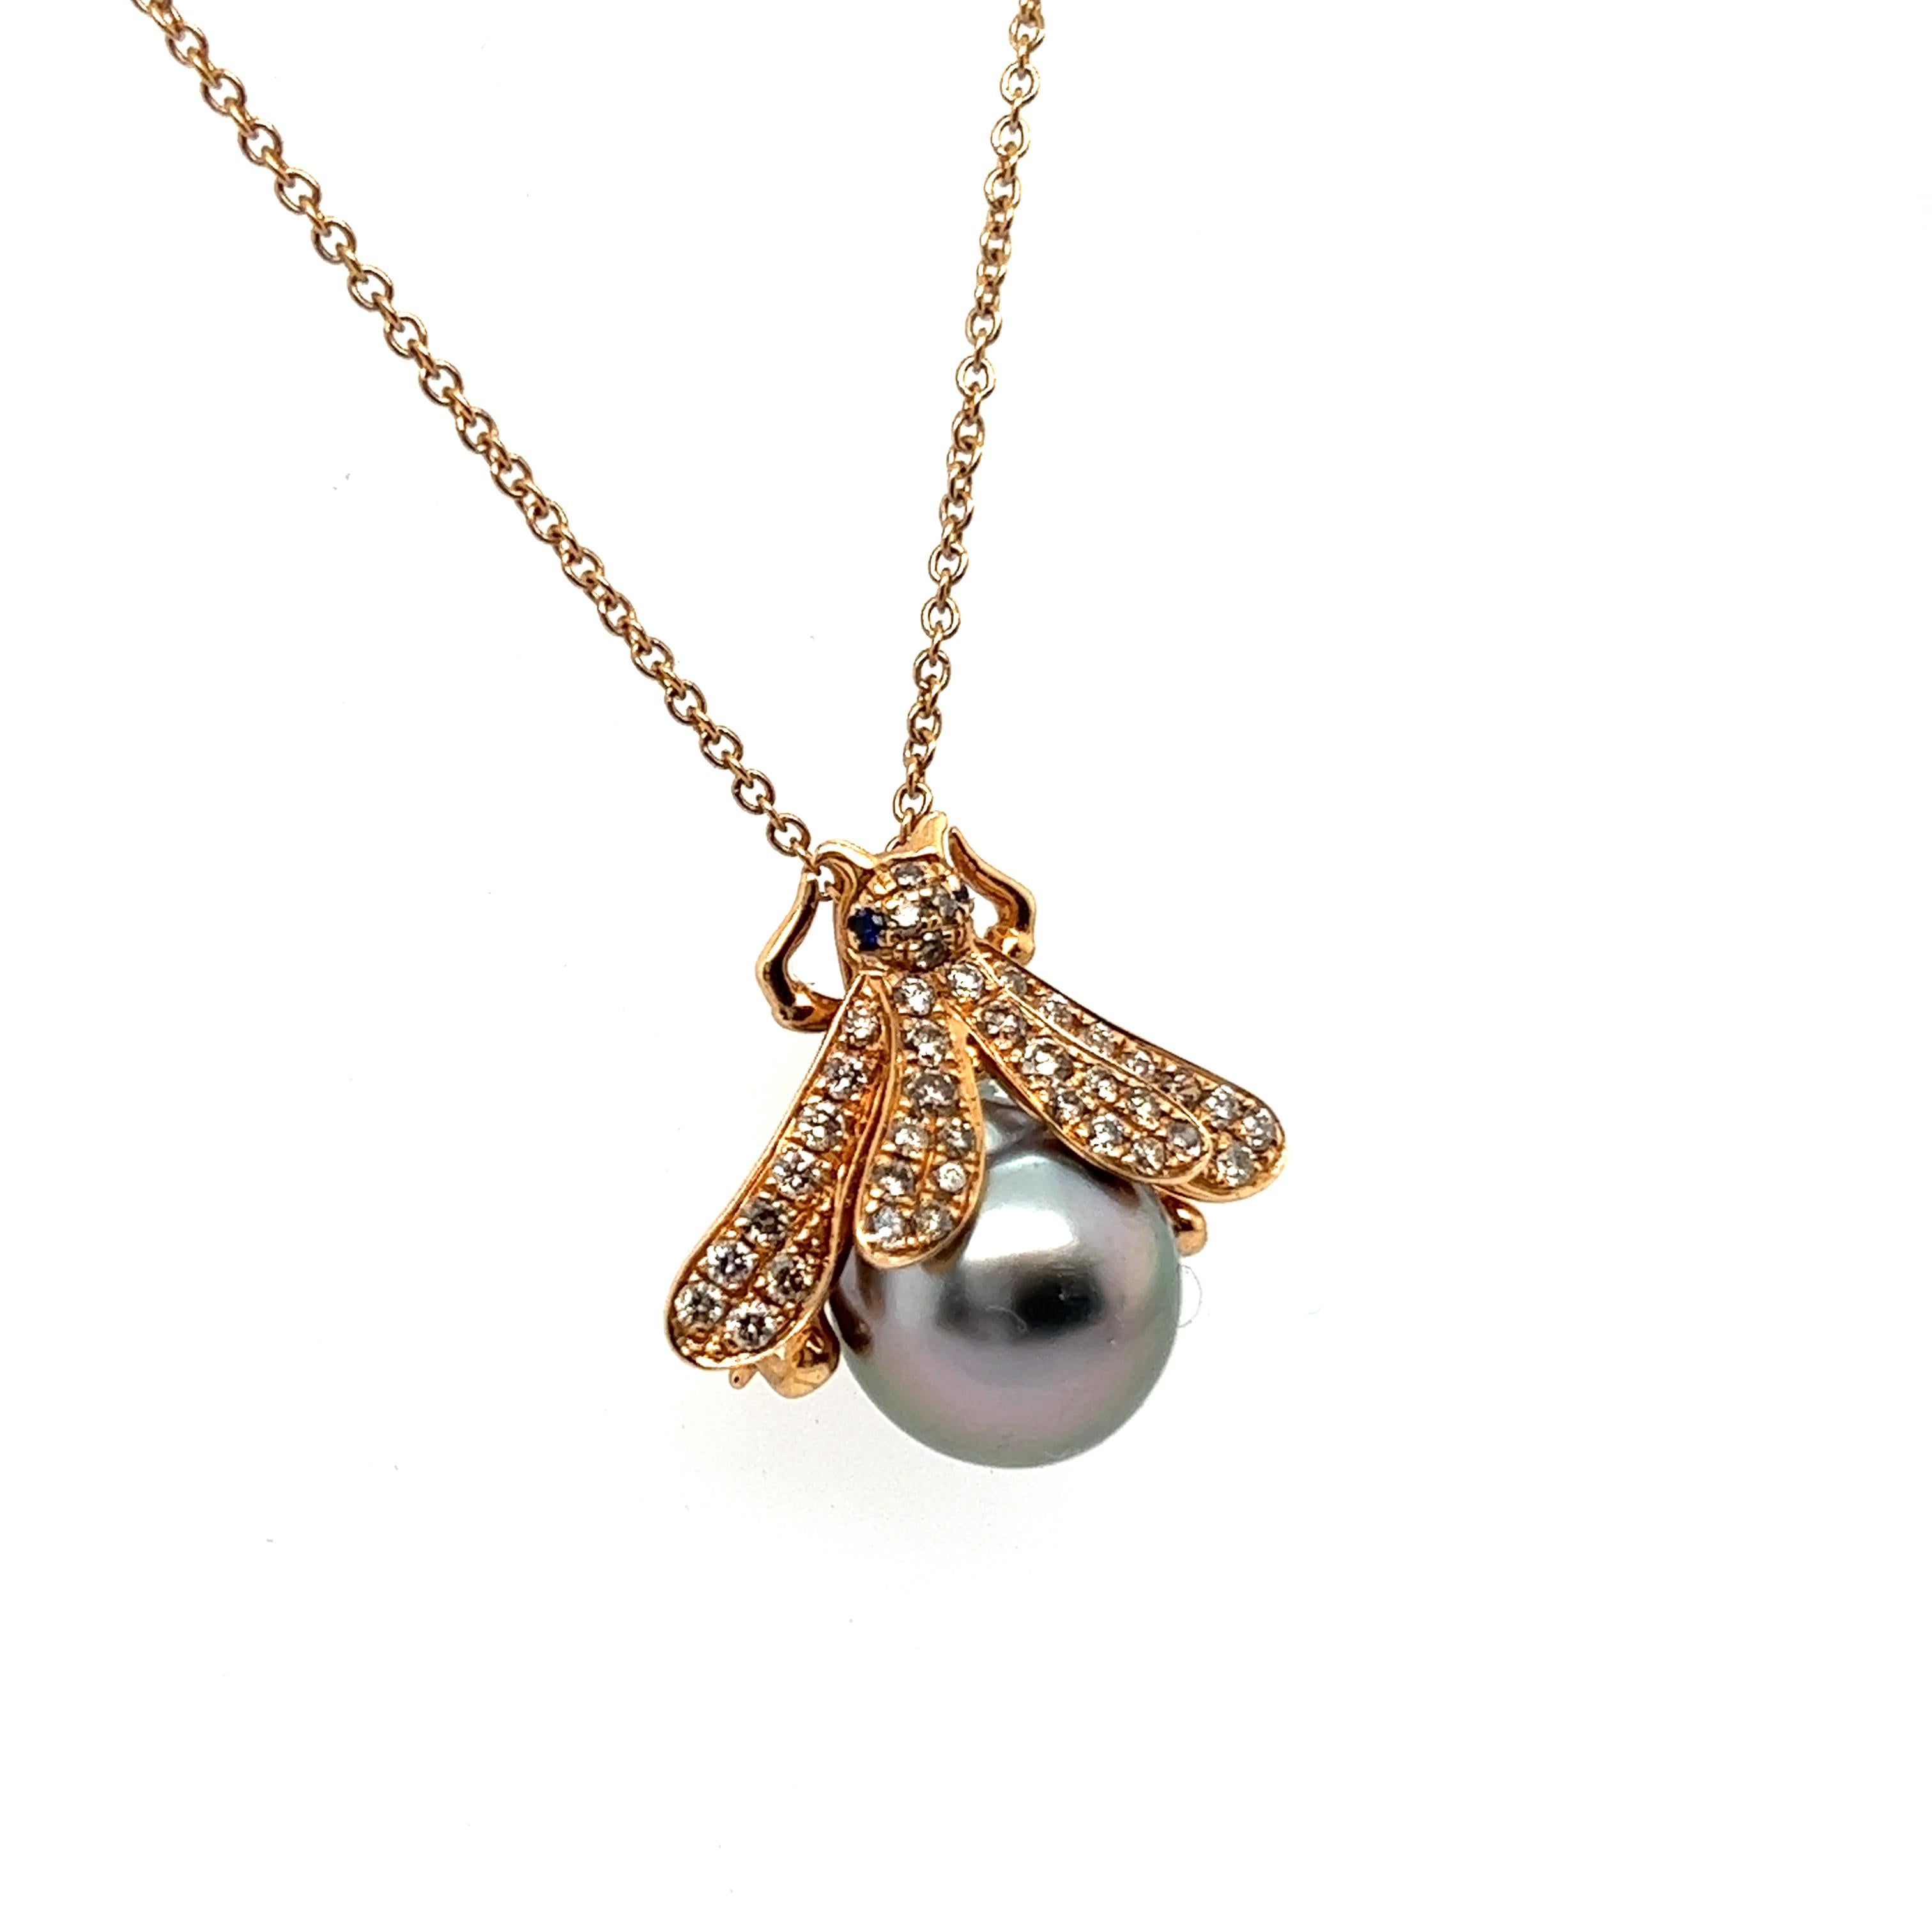 Presenting charming bee-shaped pendant with a pearl and diamonds in 18 Karat red gold.

The petite body of this little bee is crafted from a cultured grey Tahitian pearl, imparting timeless elegance. Its wings are adorned with 40 brown si clarity